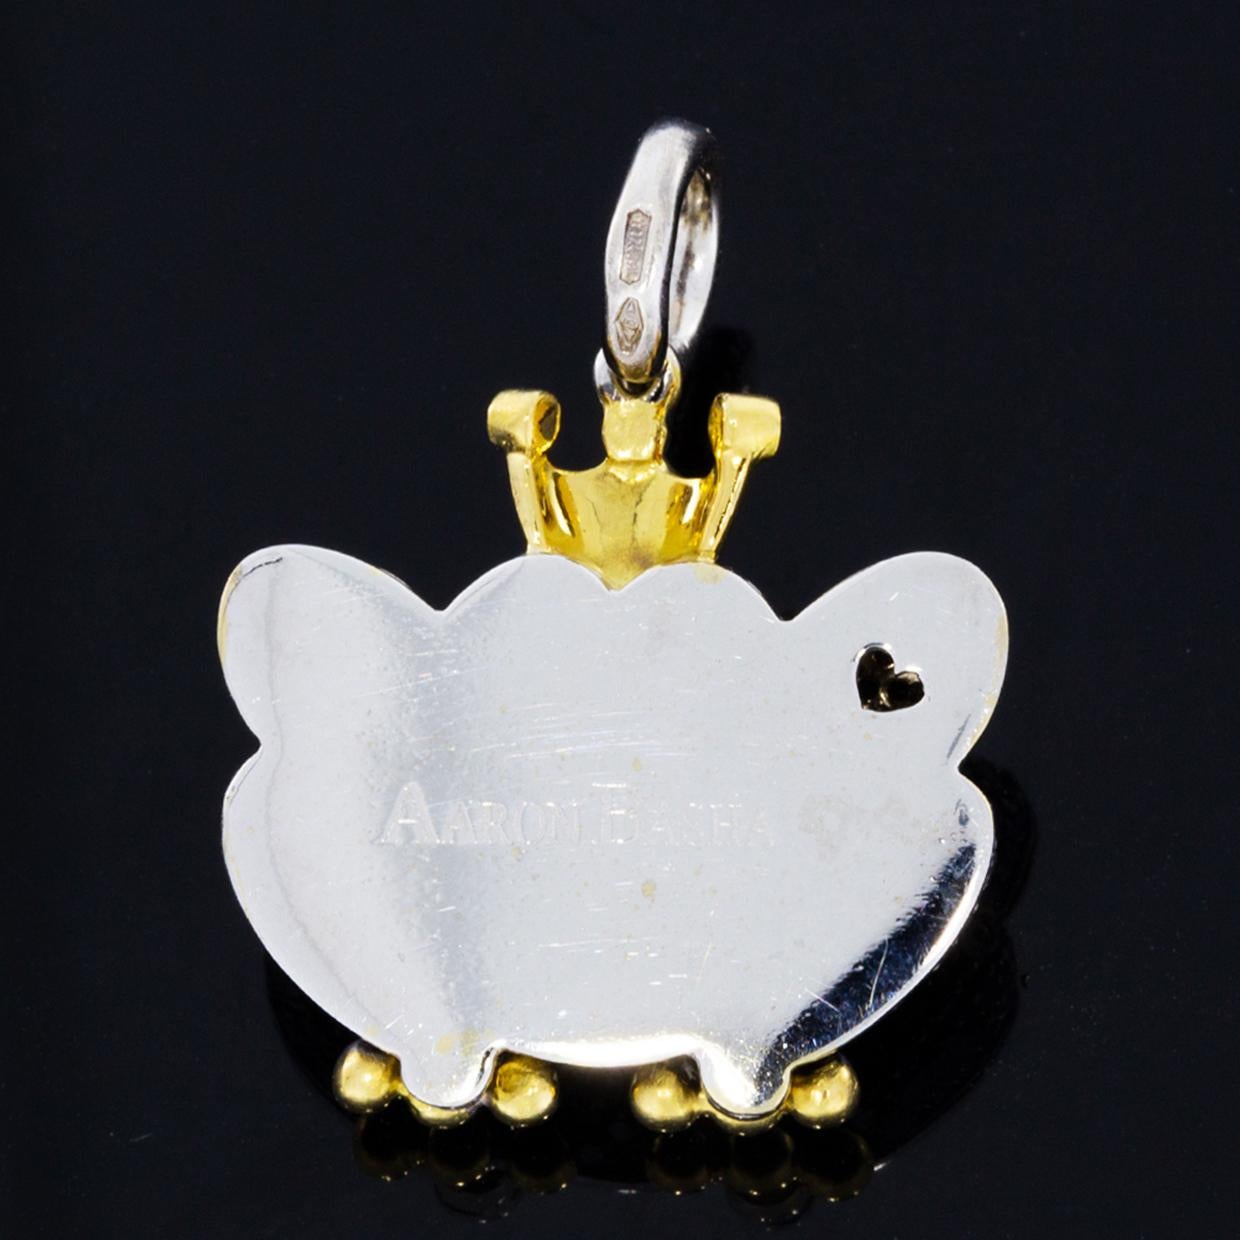 Round Cut Aaron Basha Limited Edition Frog Prince Black and White Diamond Charm or Pendant